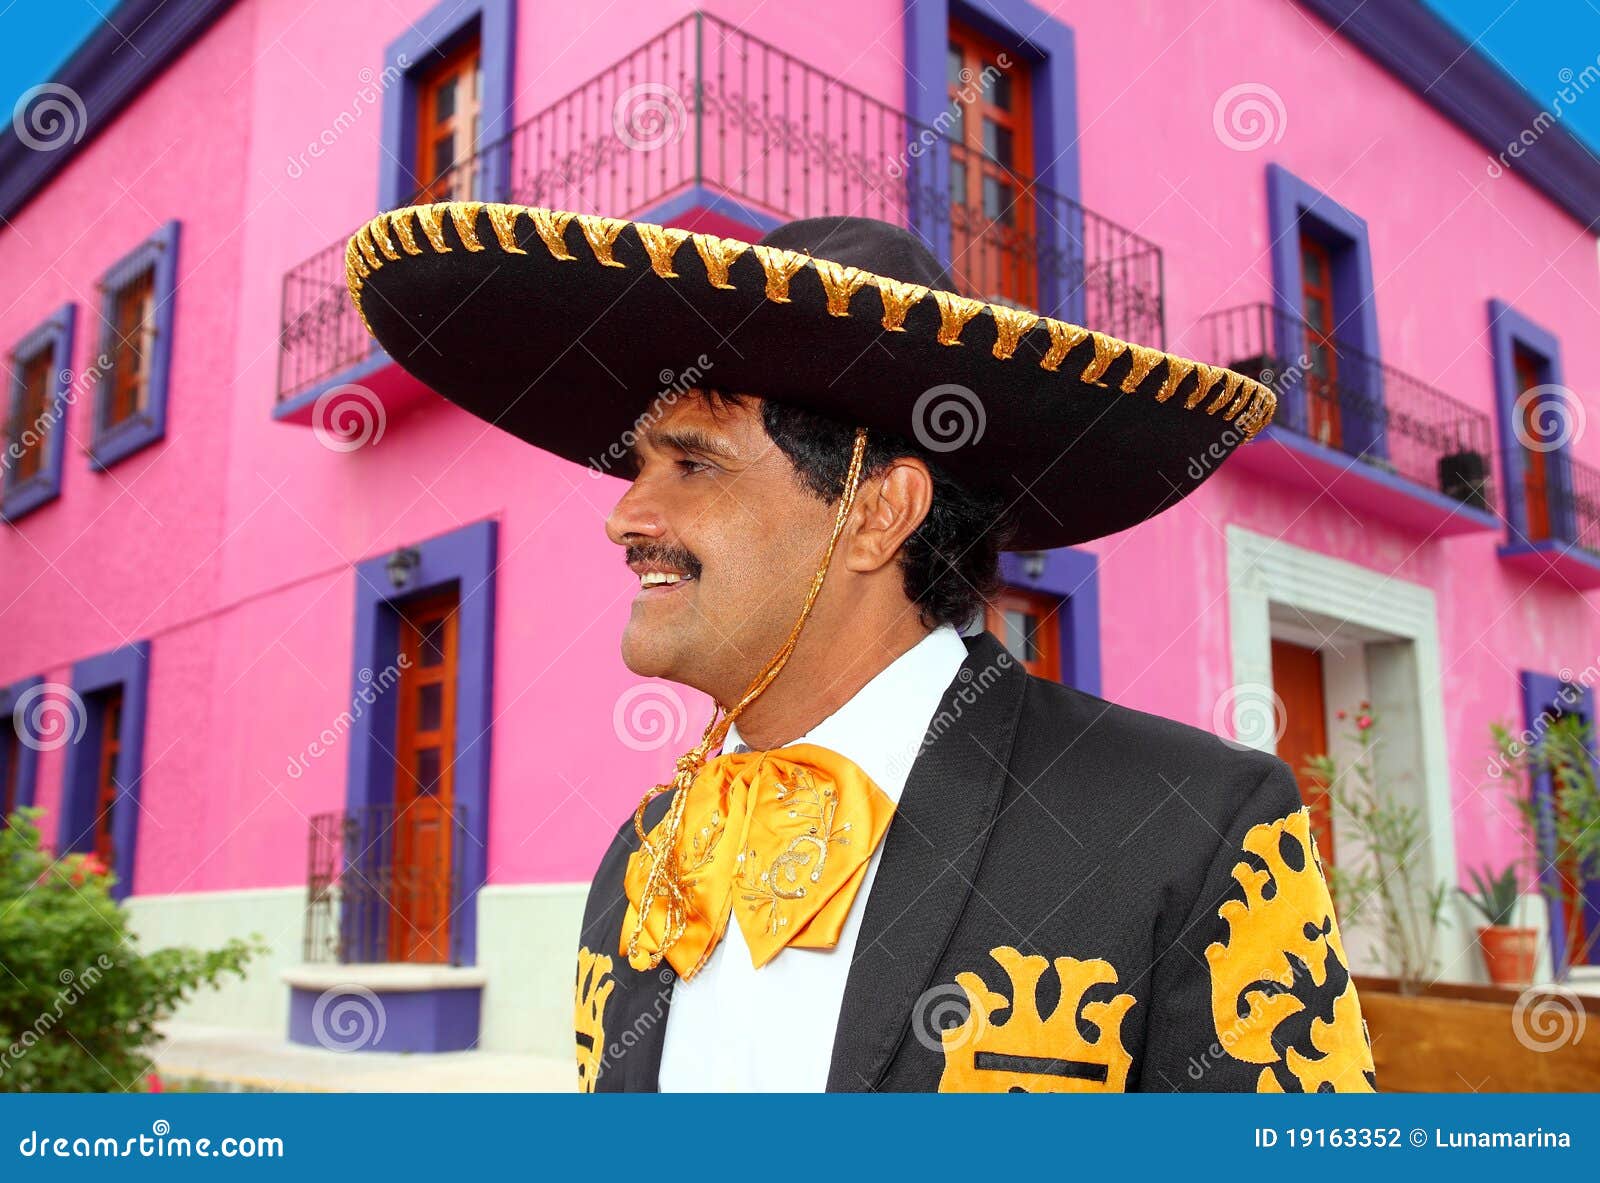 charro mexican mariachi portrait in pink house